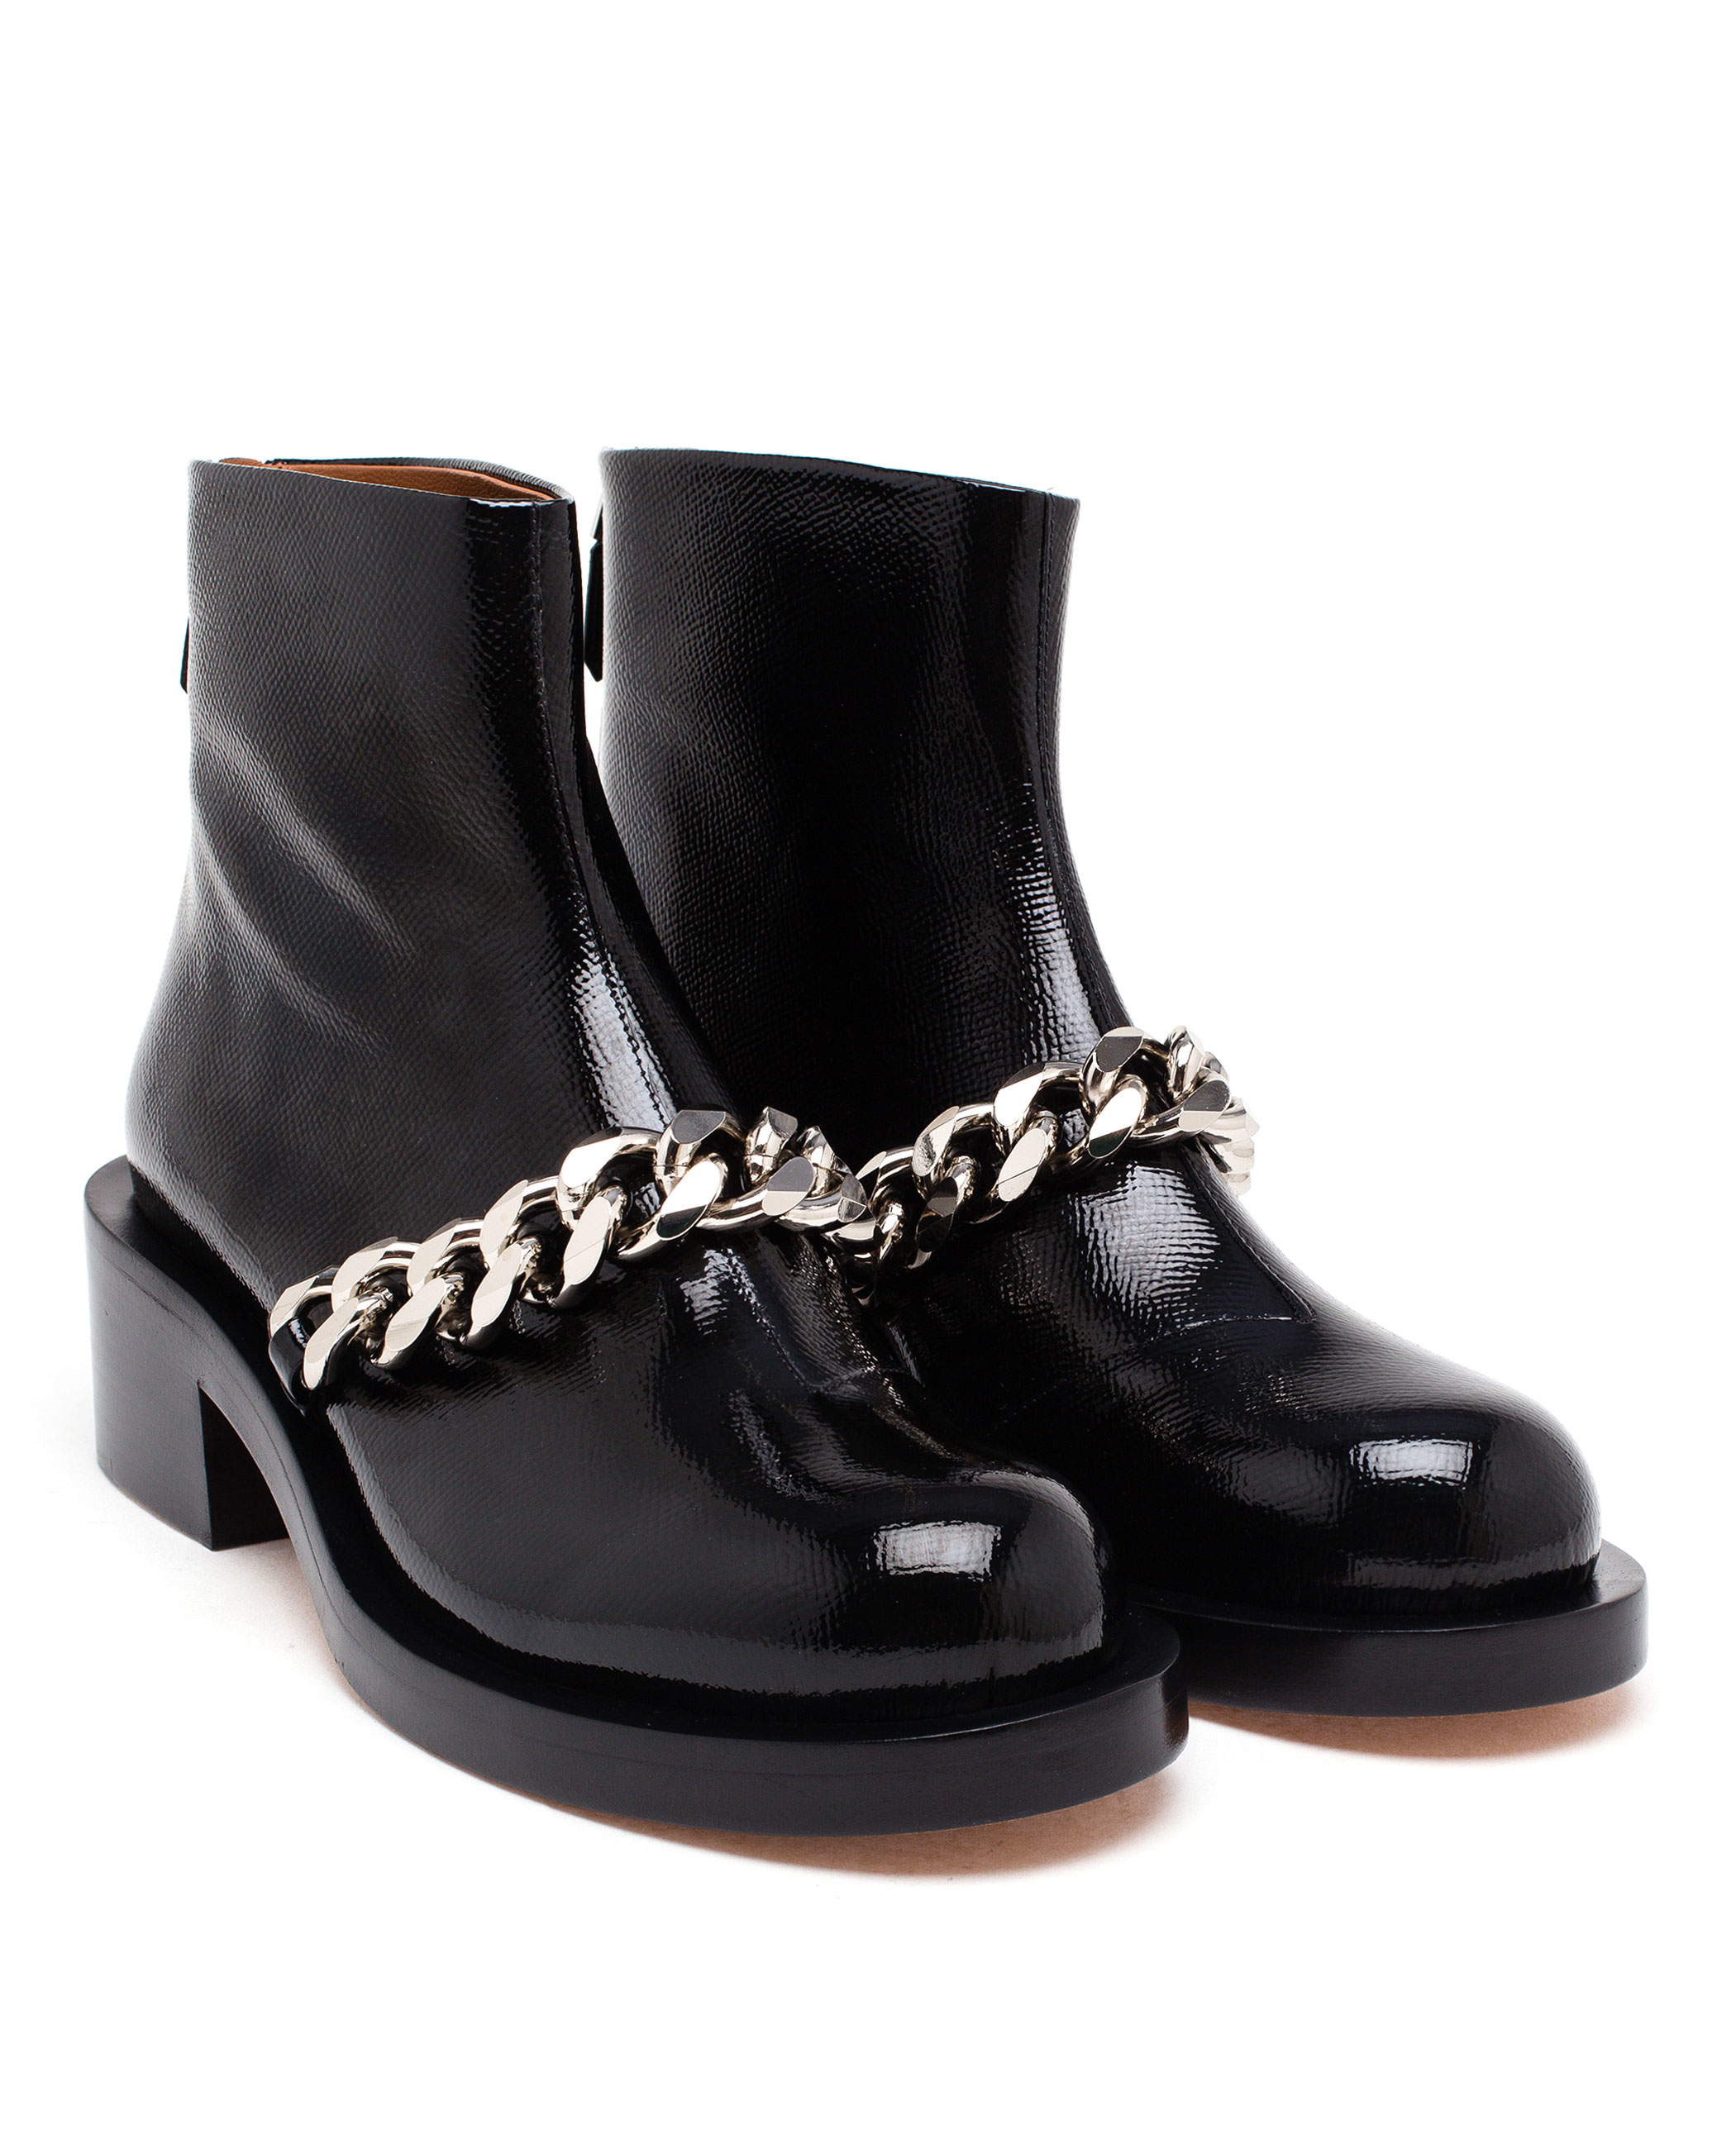 Lyst - Givenchy Patent Leather Chain Boots in Black